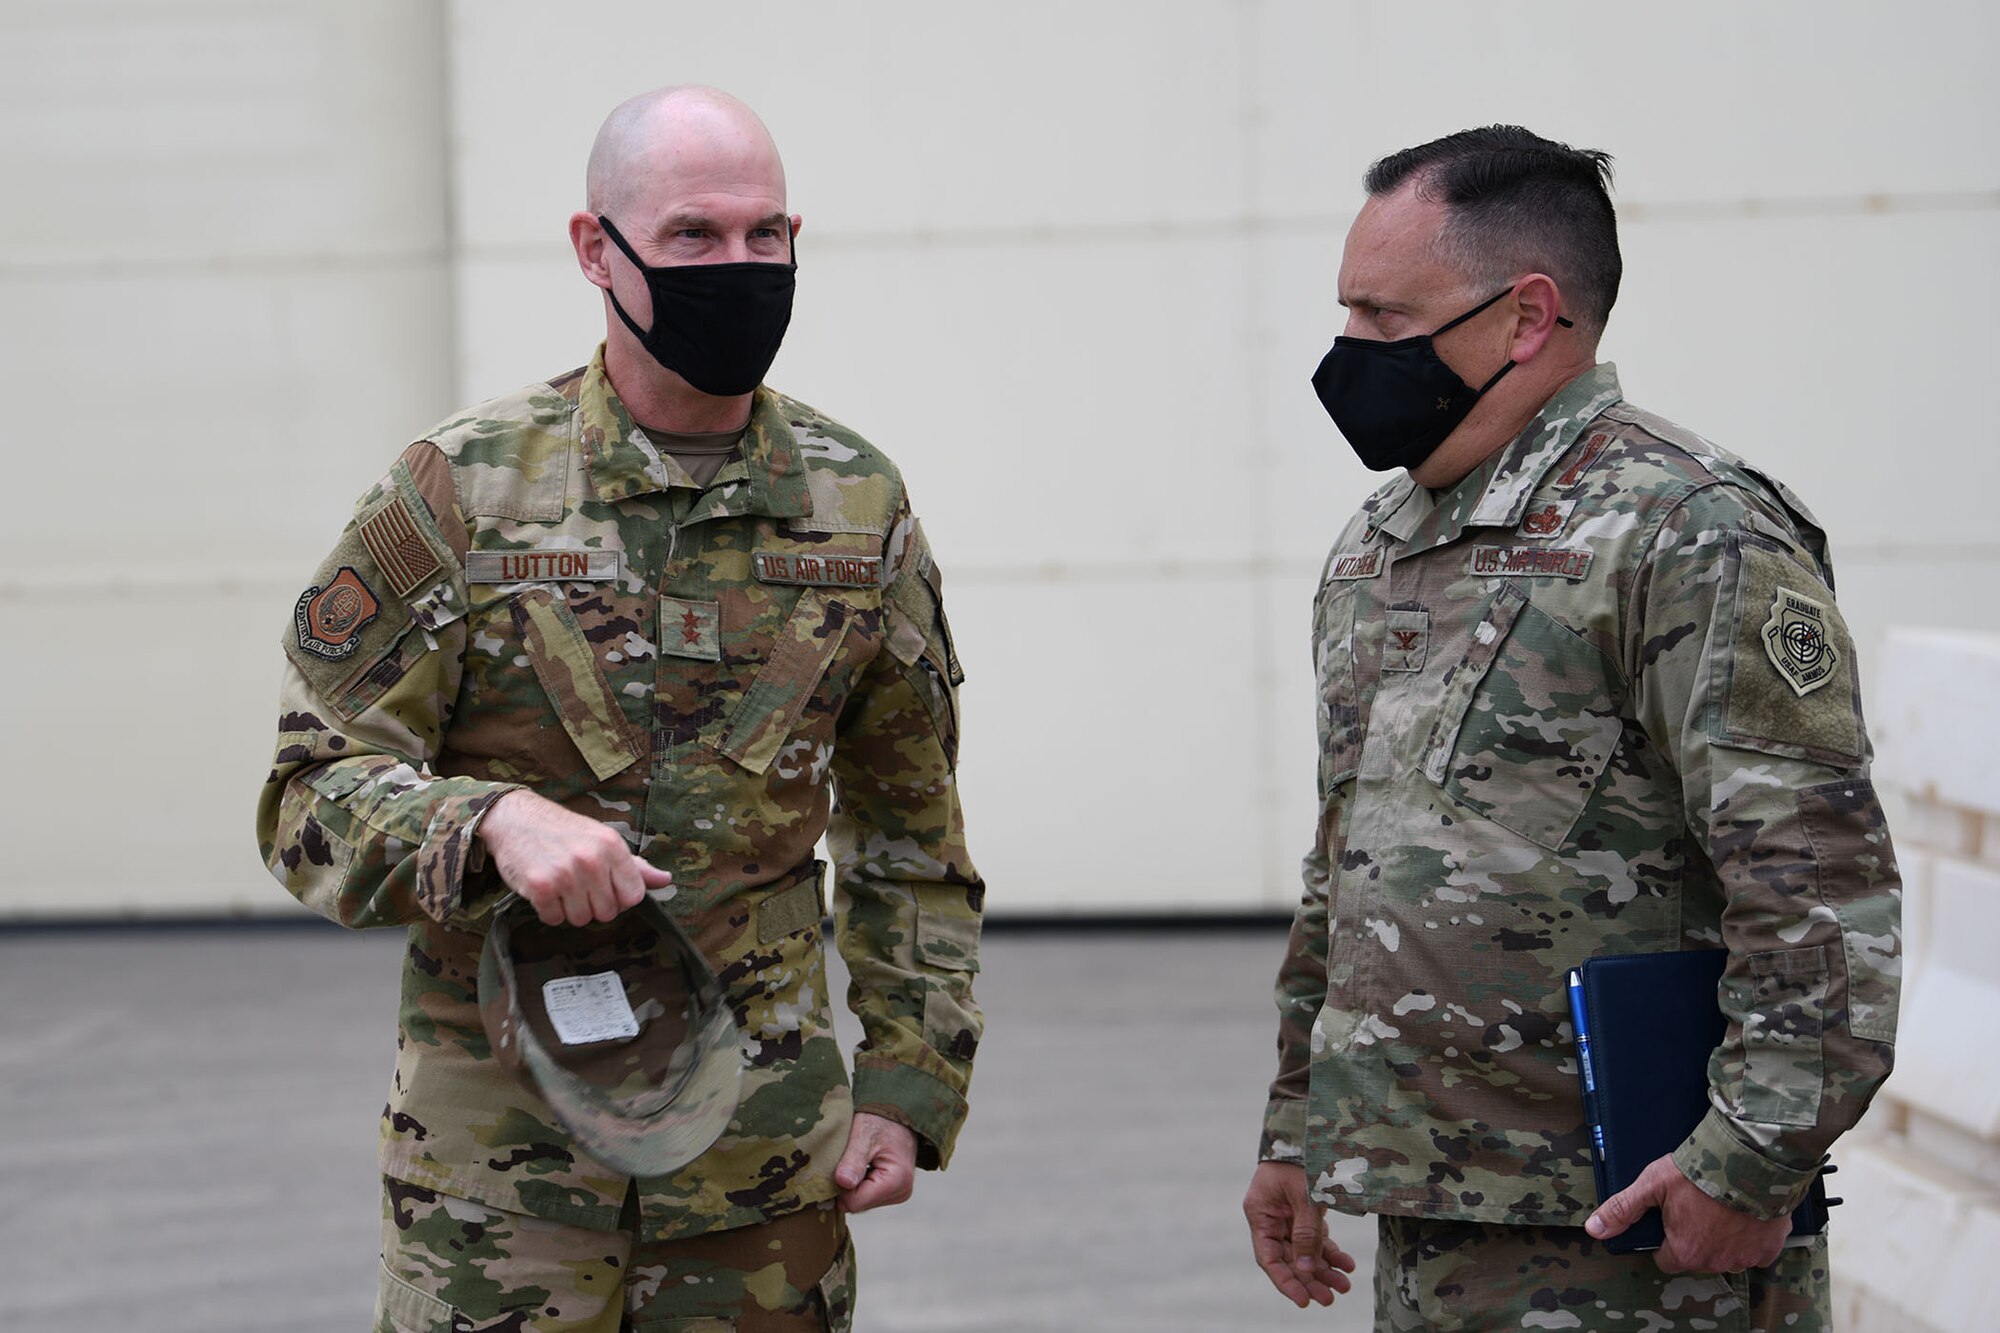 Maj. Gen. Michael J. Lutton, 20th Air Force commander, is greeted by Col. Nathan B. Mitchell, 341st Maintenance Group commander, as he arrives at the maintenance hangar for a tour of the transporter-erector trainer May 10, 2021, at Malmstrom Air Force Base, Mont.